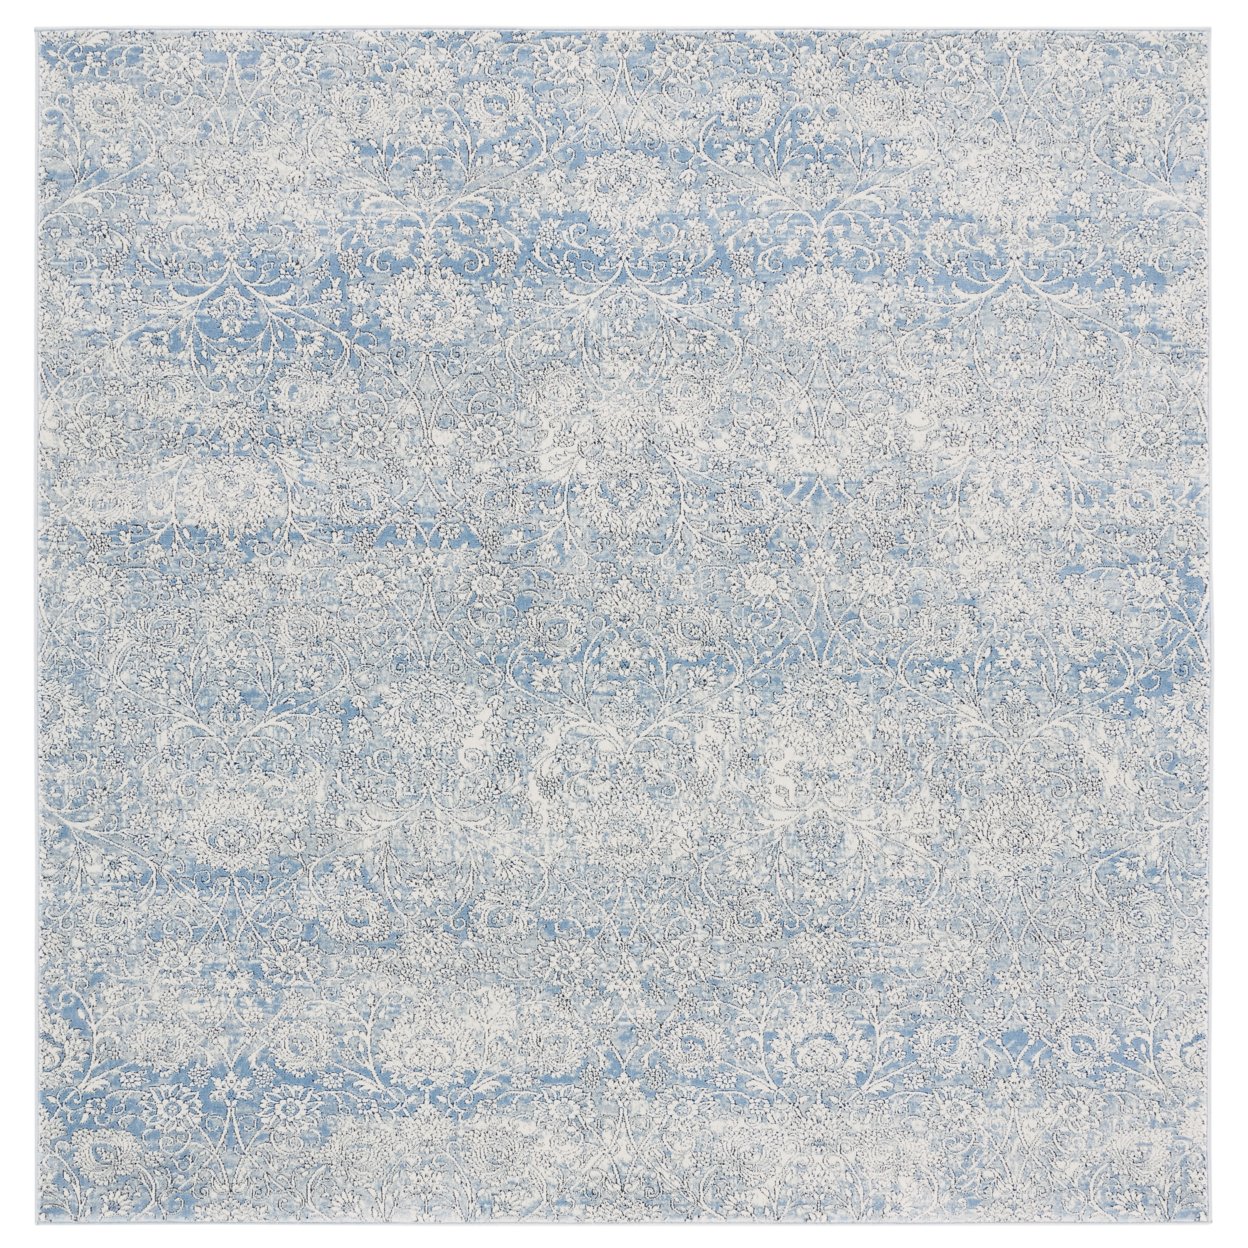 SAFAVIEH Alhambra Collection ALH617B Ivory / Blue Rug - 6-7 X 6-7 Square